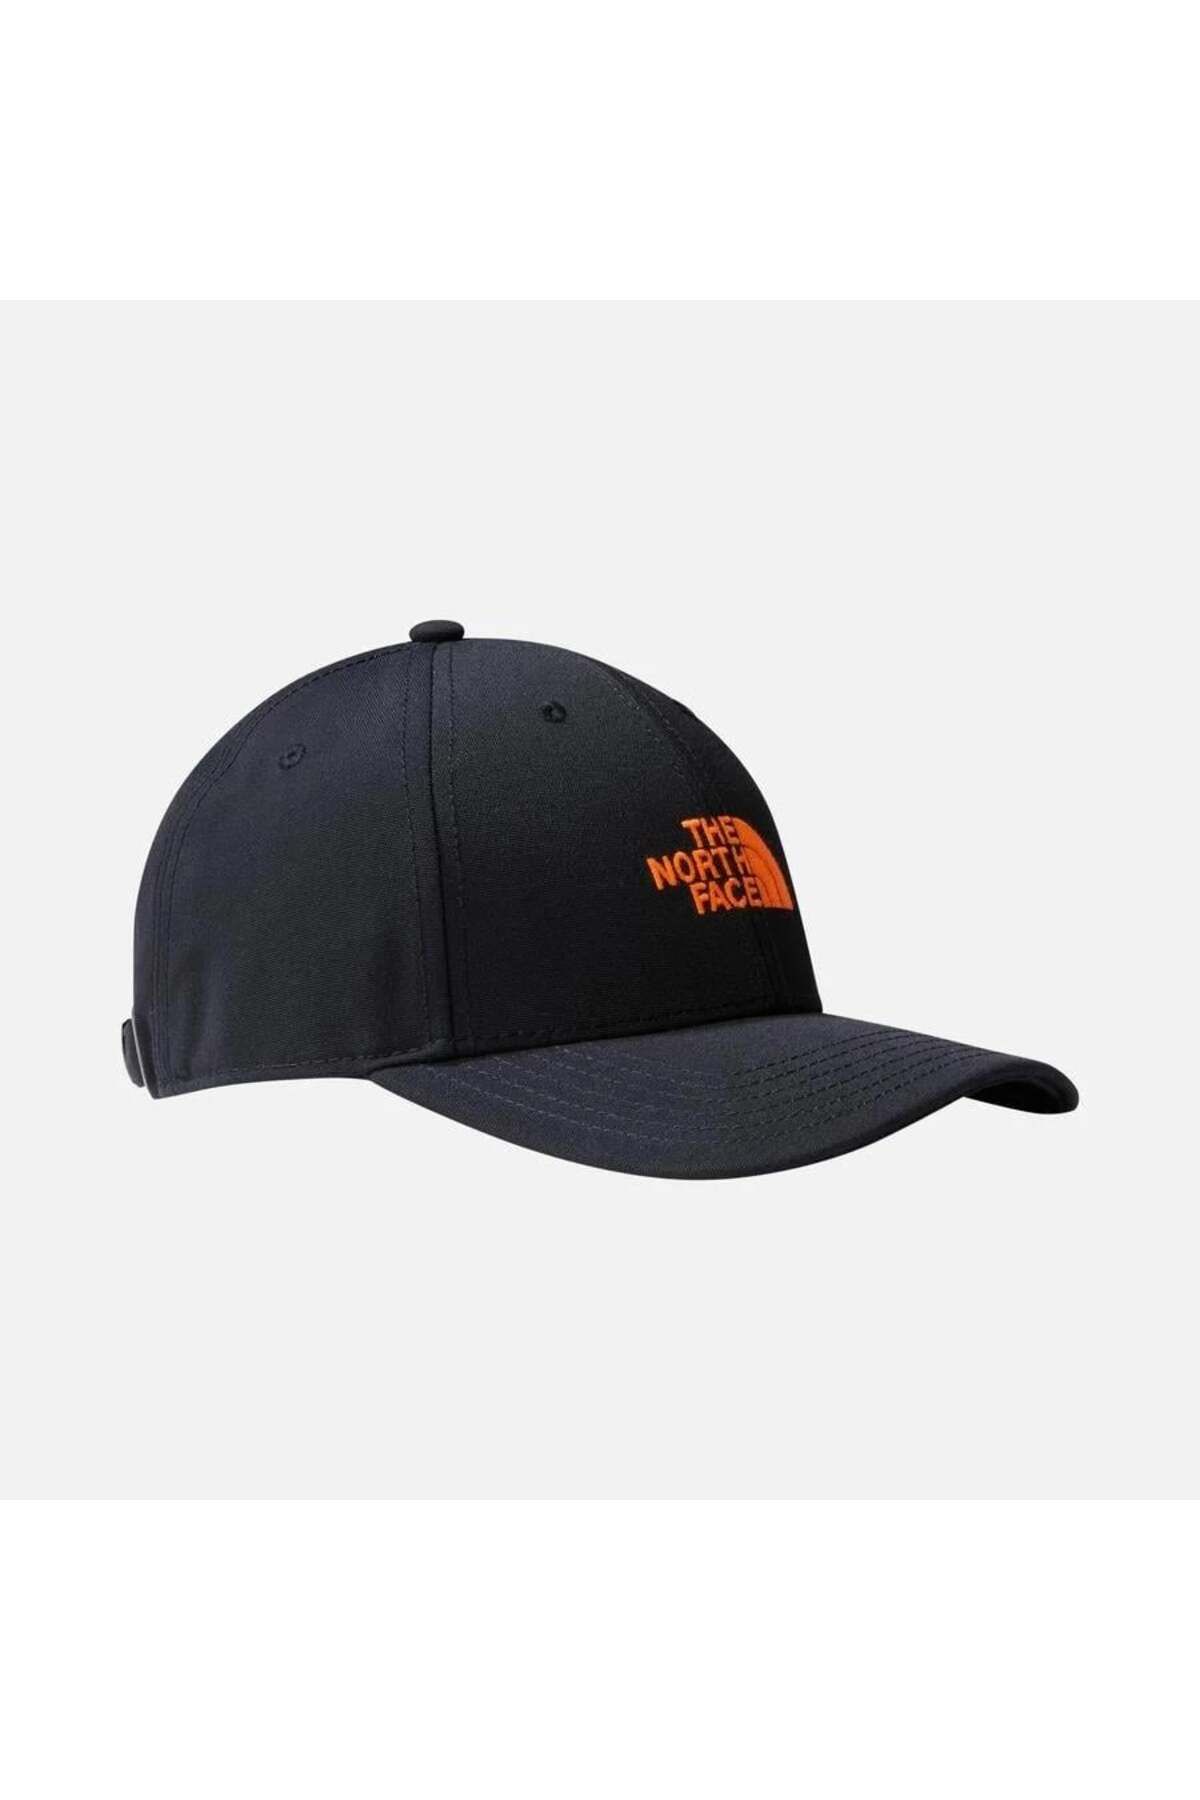 The North Face Recycled 66 Classic Hat Unisex Şapka Nf0a4vsvuıf1